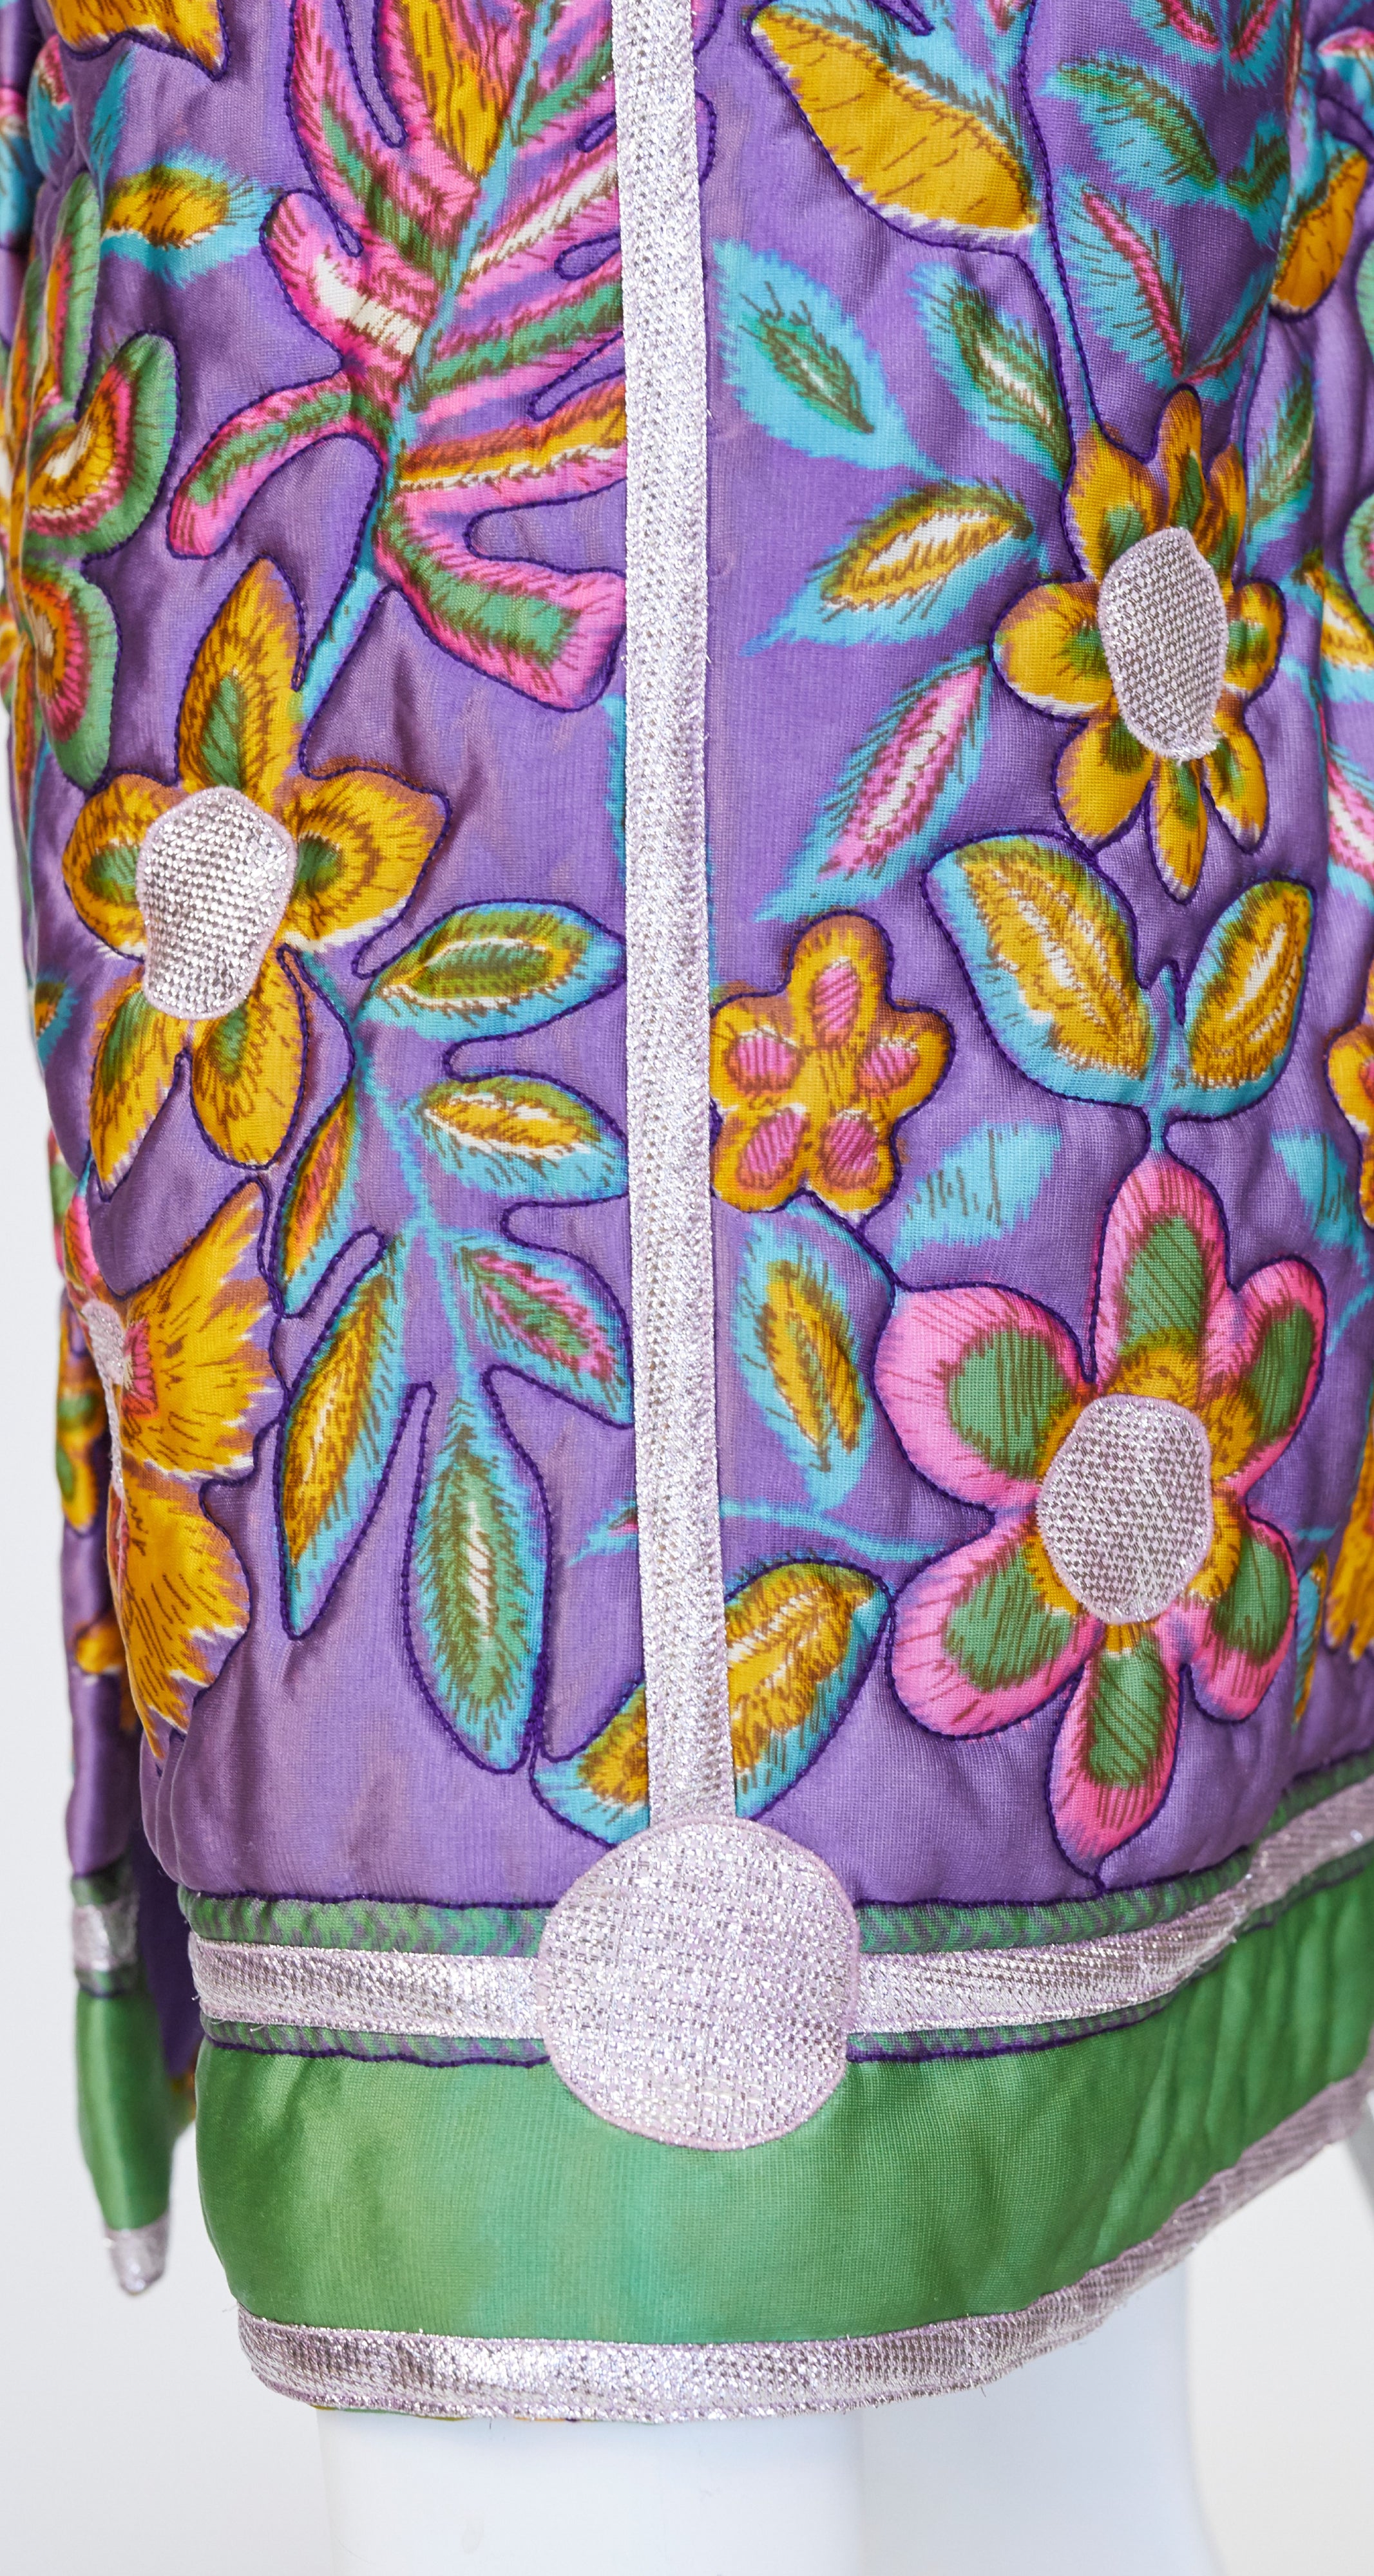 1960s Floral & Metallic Purple Quilted Skirt